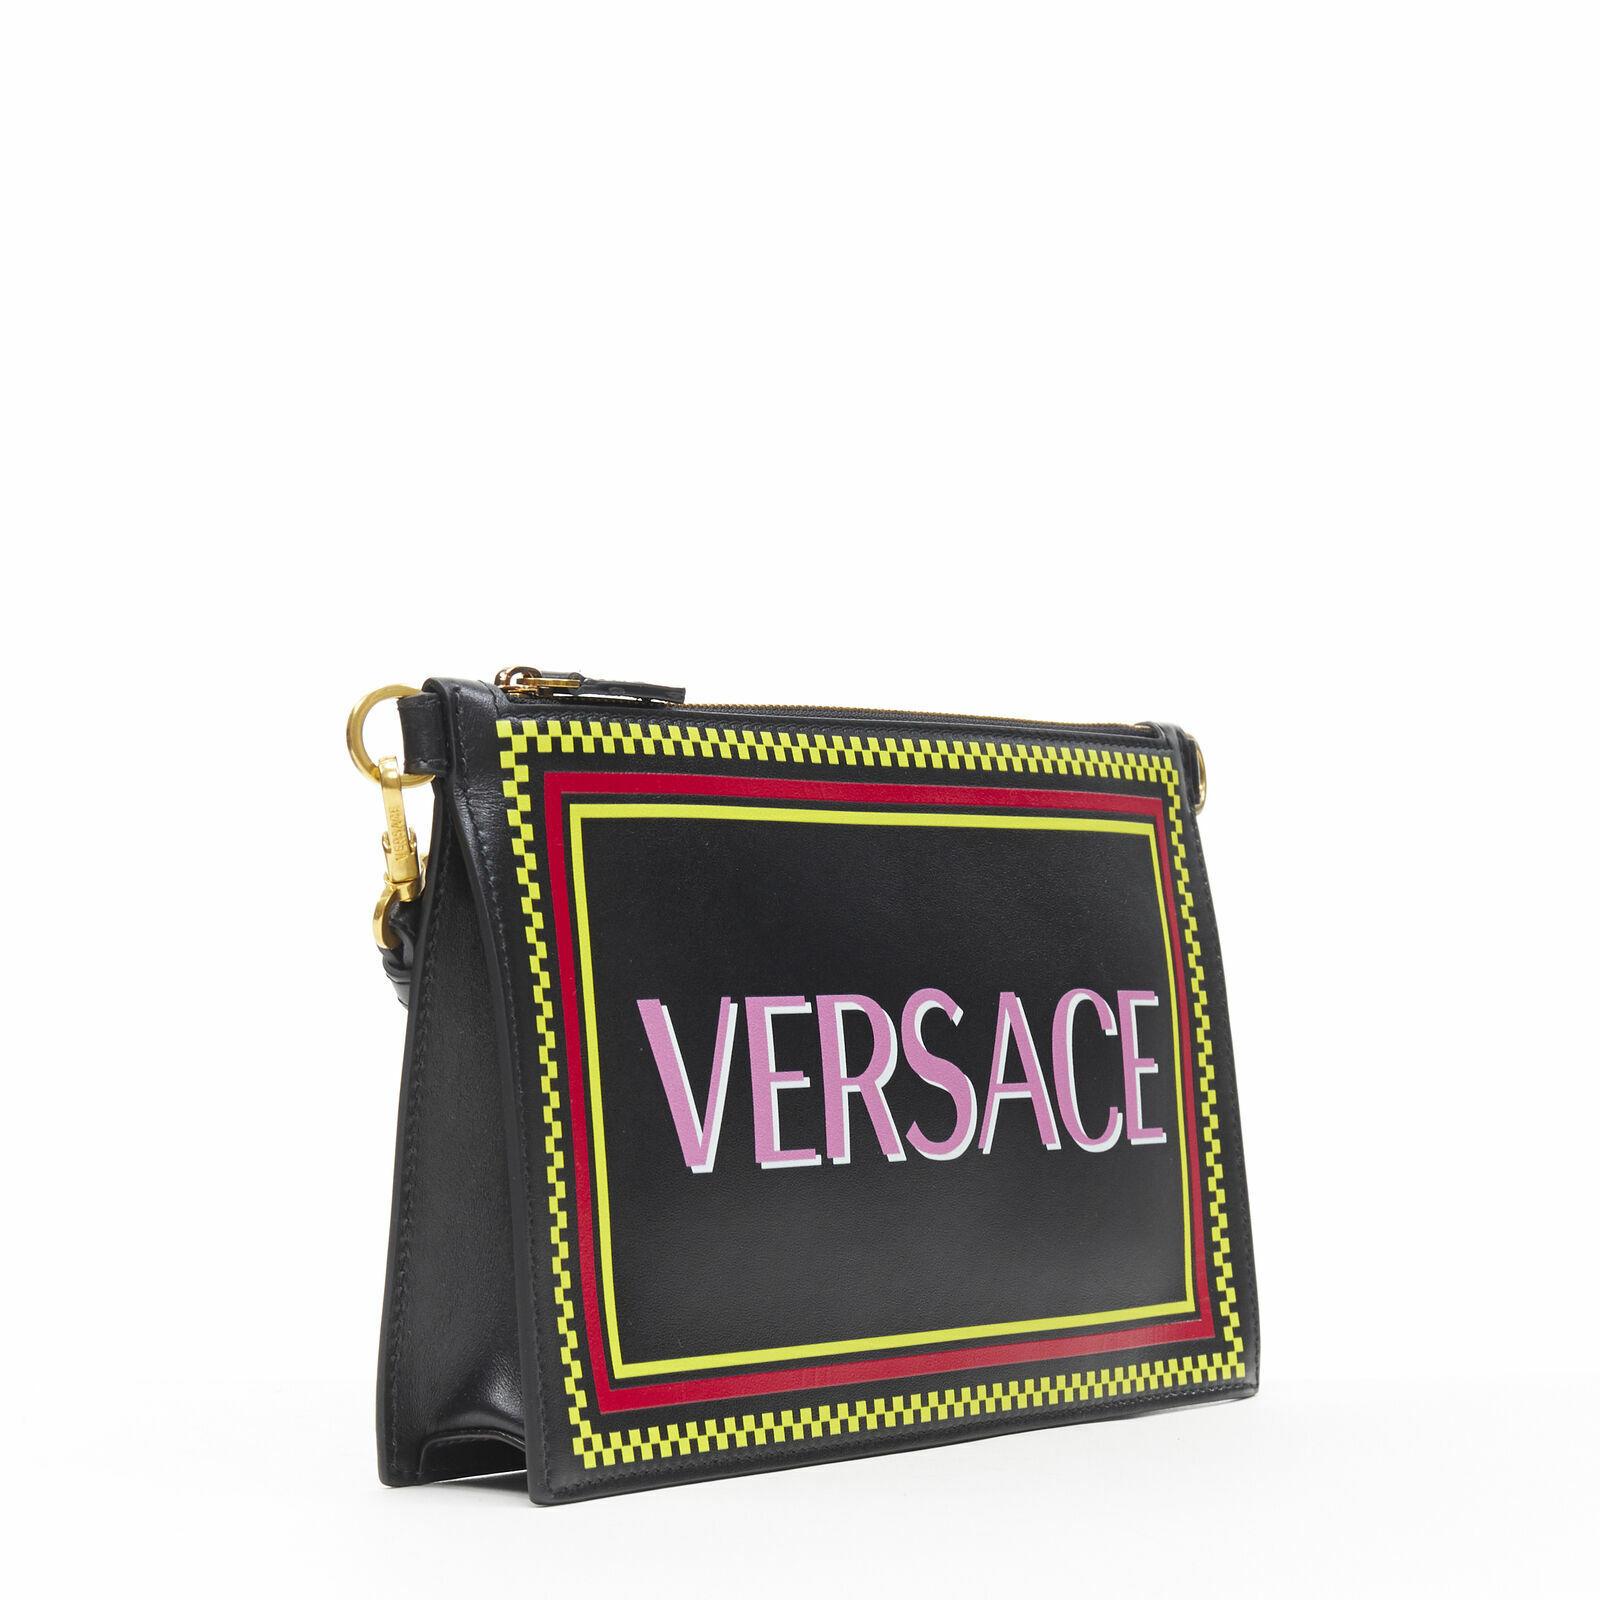 VERSACE 90s graphic logo black calf zip pouch crossbody clutch bag
Reference: TGAS/B00509
Brand: Versace
Designer: Donatella Versace
Model: 90's logo top zip crossbody pouch
Collection: 90's Vintage Logo
Material: Leather
Color: Black, Pink
Pattern: